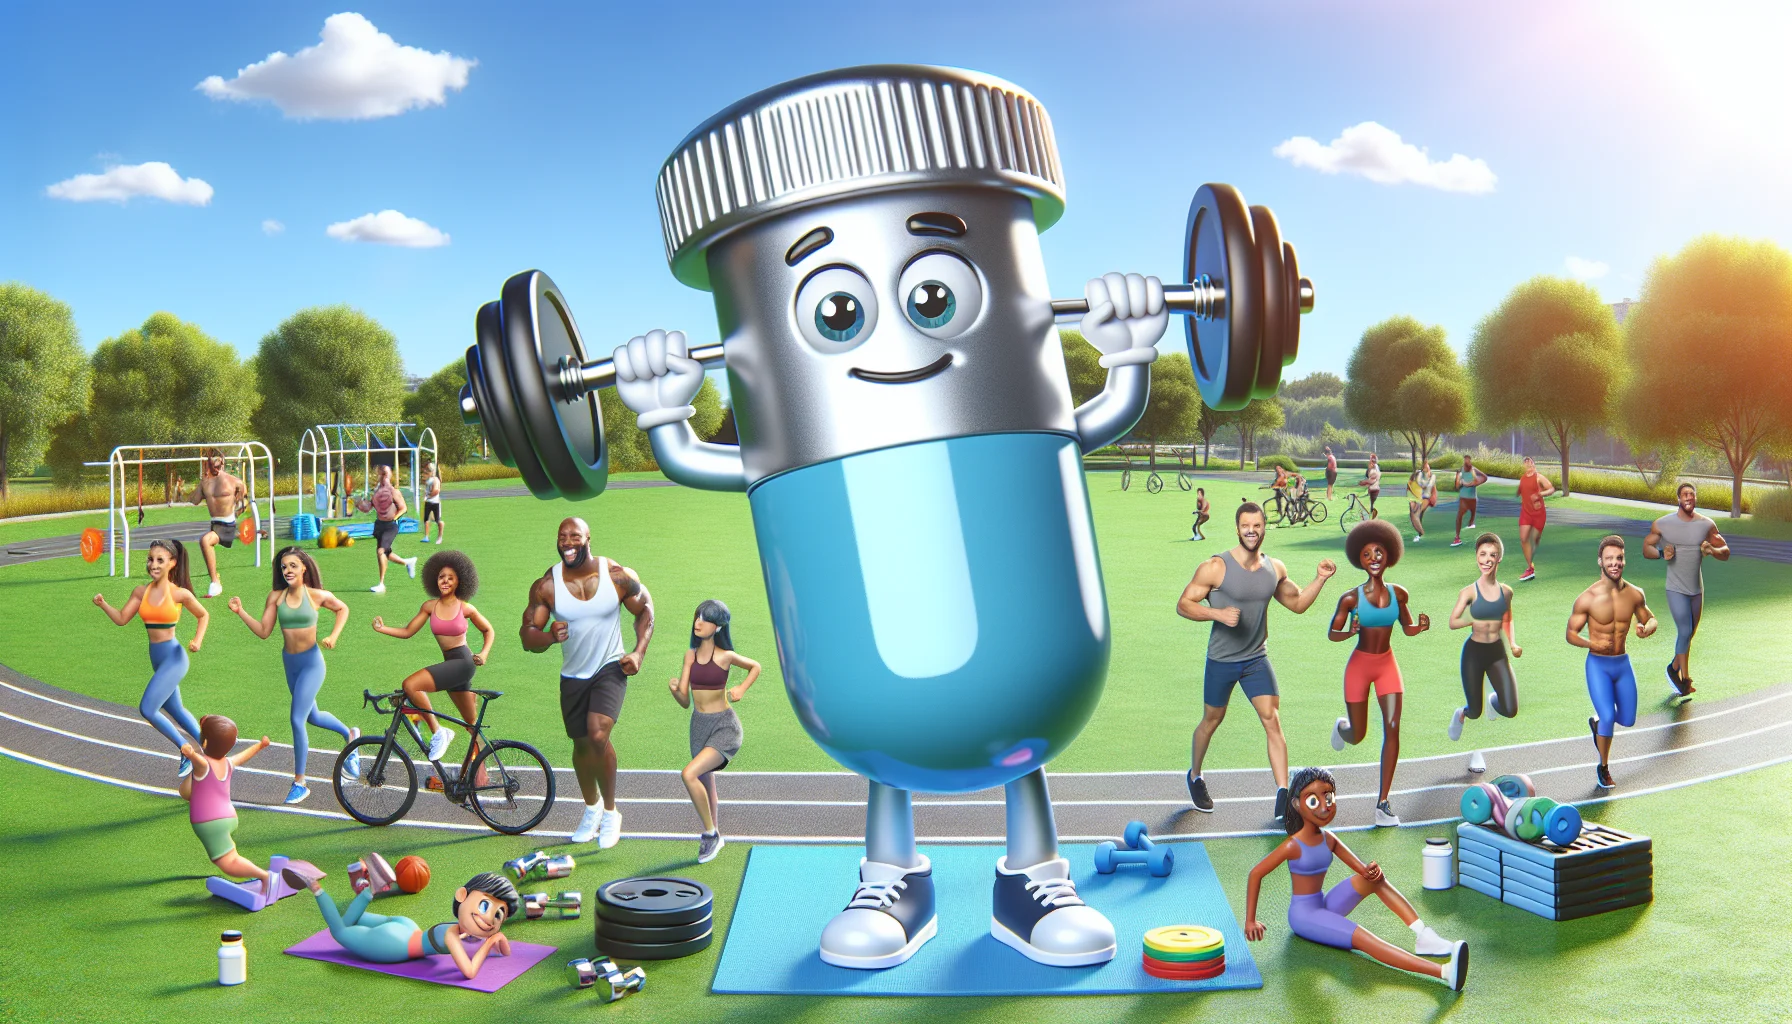 Produce a fun and lively image of a fitness event organized around the concept of sports supplementation. In the center, illustrate a magnified image of a Kal Magnesium Glycinate supplement pill, anthropomorphized with expressive cartoon-like eyes, arms and legs, lifting weights. Around the main character, portray individuals of various descents, such as Caucasian, Hispanic, African, South Asian and Middle-Eastern, all engaging in different sports activities like cycling, running and yoga. The landscape is a park on a bright sunny day filled with fitness equipment and greenery to add a hint of health, nature and overall wellness.